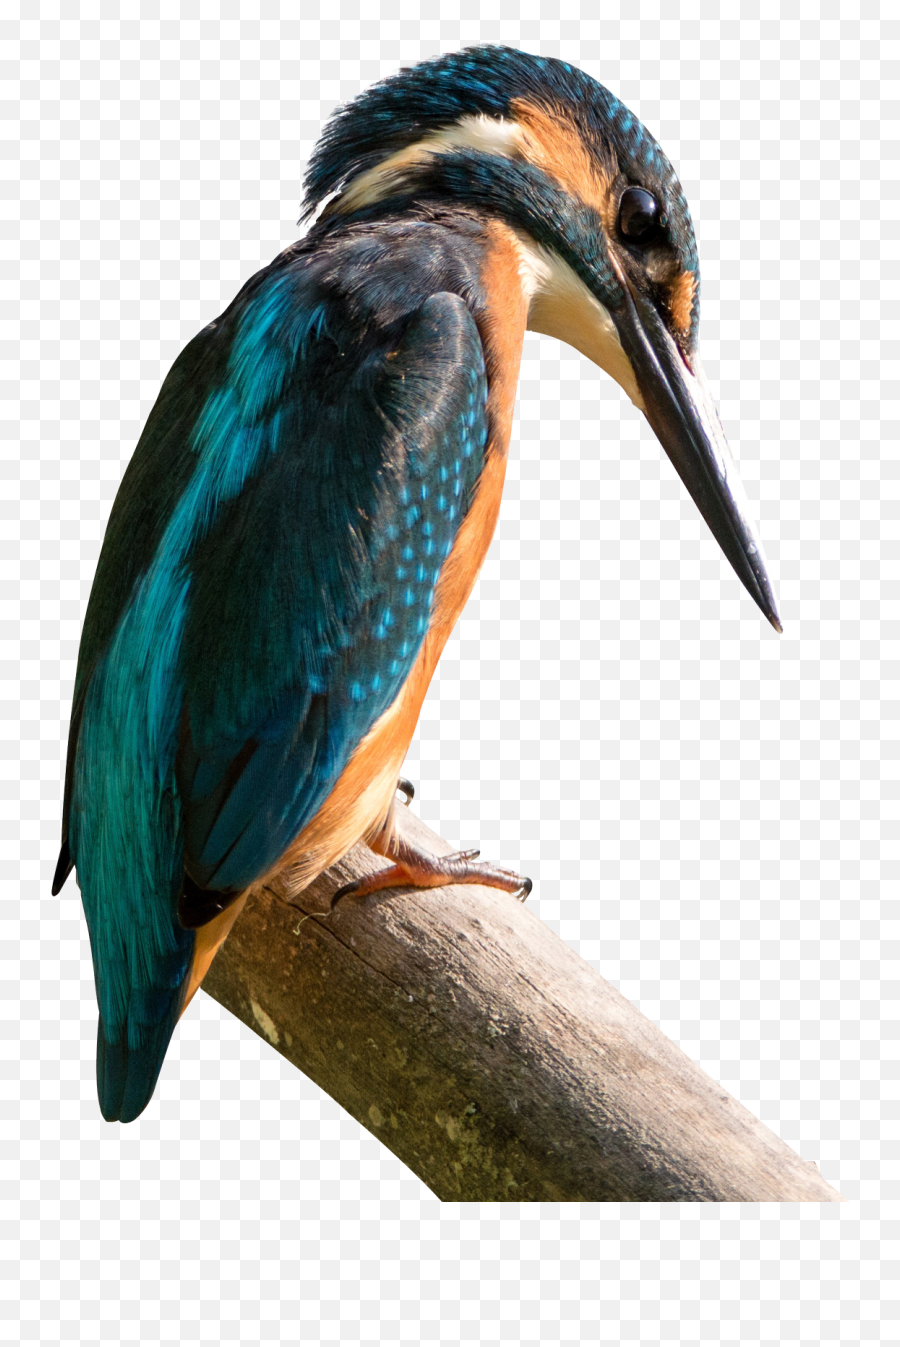 Kingfisher Bird Png Transparent Image - Pngpix Birds Found In Hilly Region Of Nepal,Birds Png